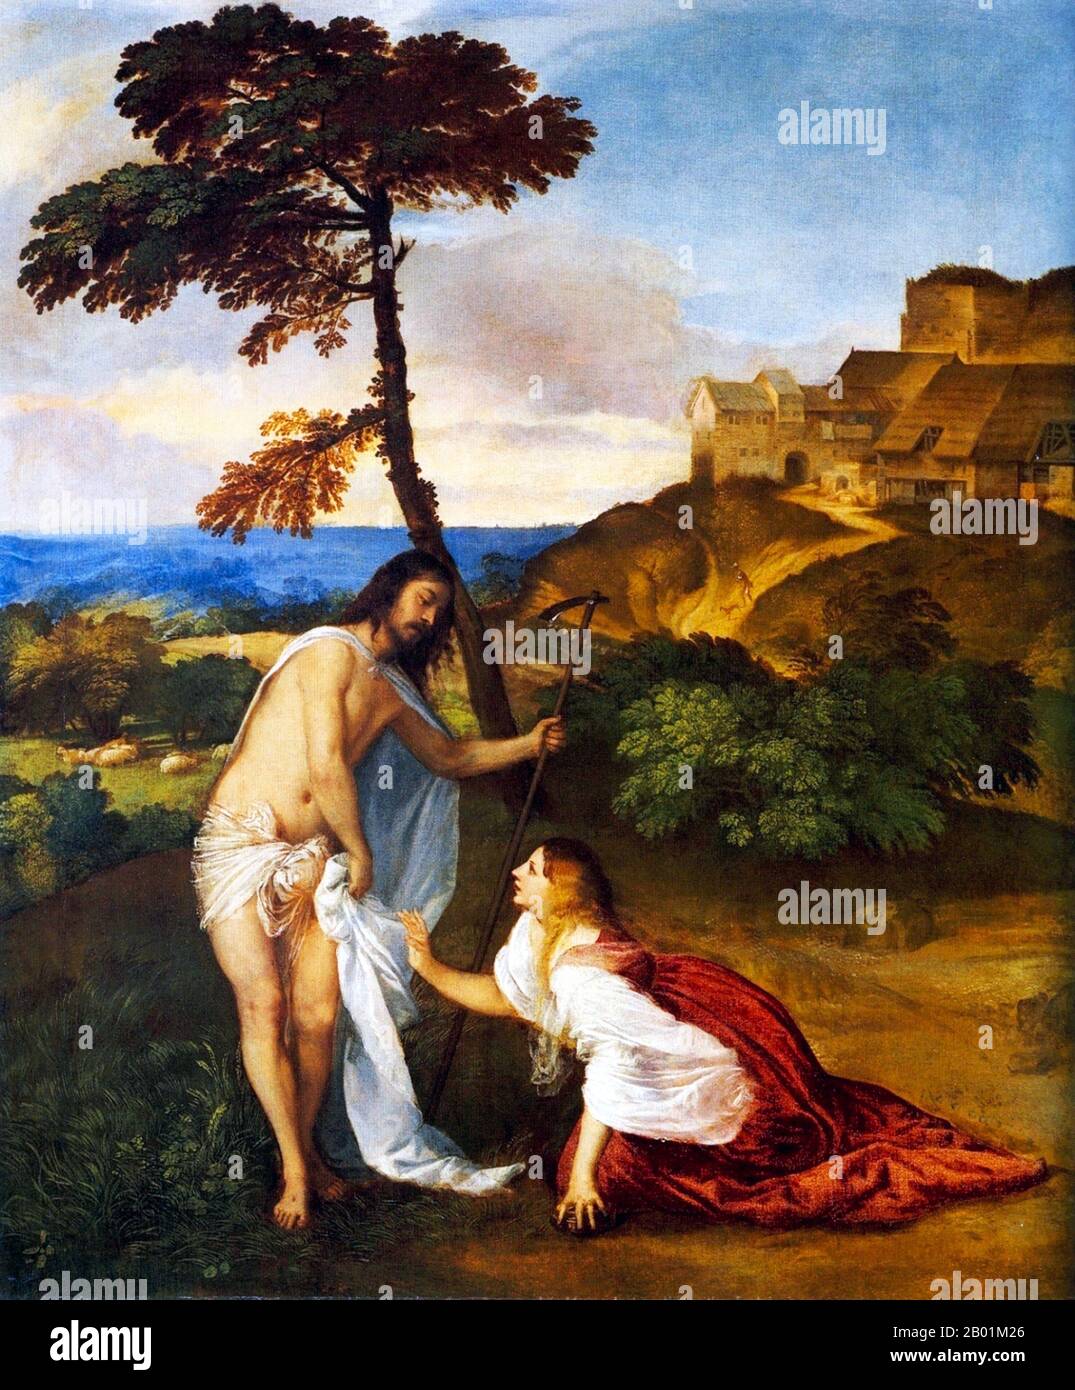 Italy: 'Christ and Mary Magdalene (Noli Me Tangere)'. Oil on canvas painting by Titian (1490 - 27 August 1576), c. 1512.  Mary Magdalene was one of Jesus' most celebrated disciples, and the most important woman disciple in the movement of Jesus. Jesus cleansed her of 'seven demons', [Luke 8:2] [Mark 16:9] conventionally interpreted as referring to complex illnesses. She became most prominent during his last days, being present at the cross after the male disciples (excepting John the Beloved) had fled, and at his burial. She was the first person to see Jesus after his Resurrection. Stock Photo